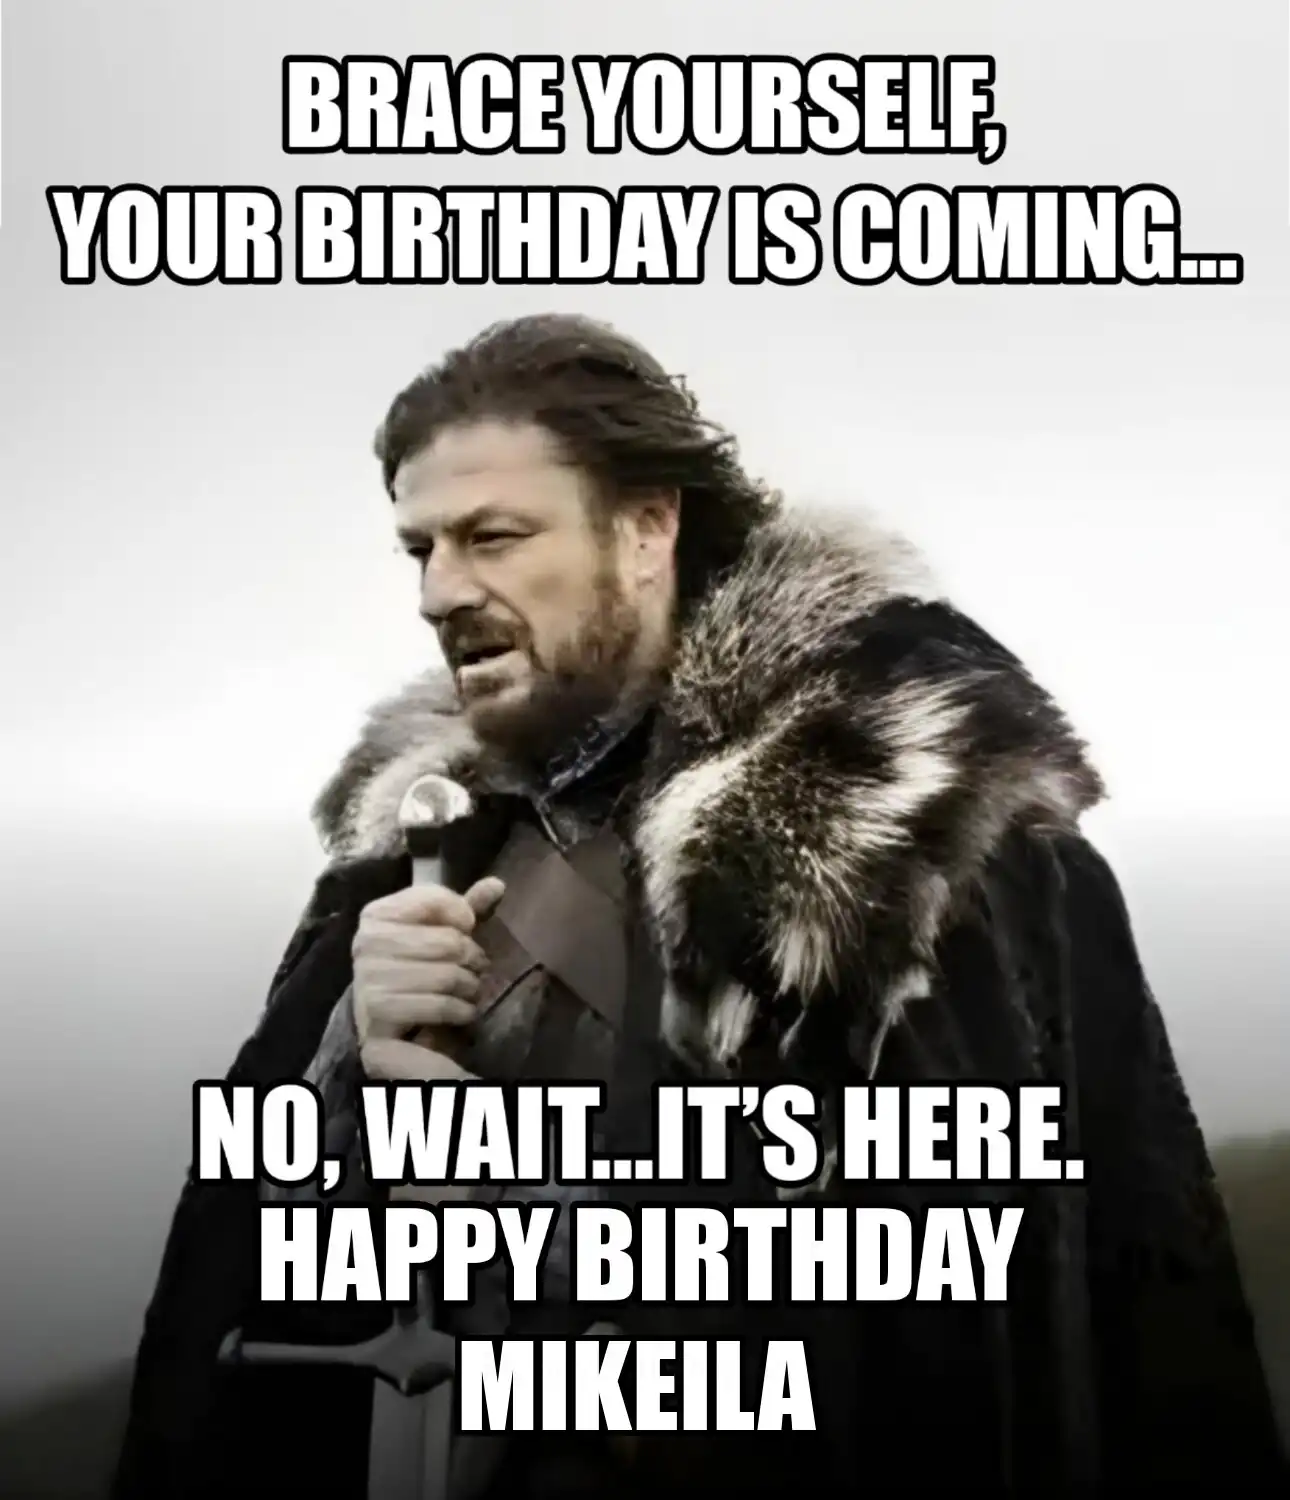 Happy Birthday Mikeila Brace Yourself Your Birthday Is Coming Meme